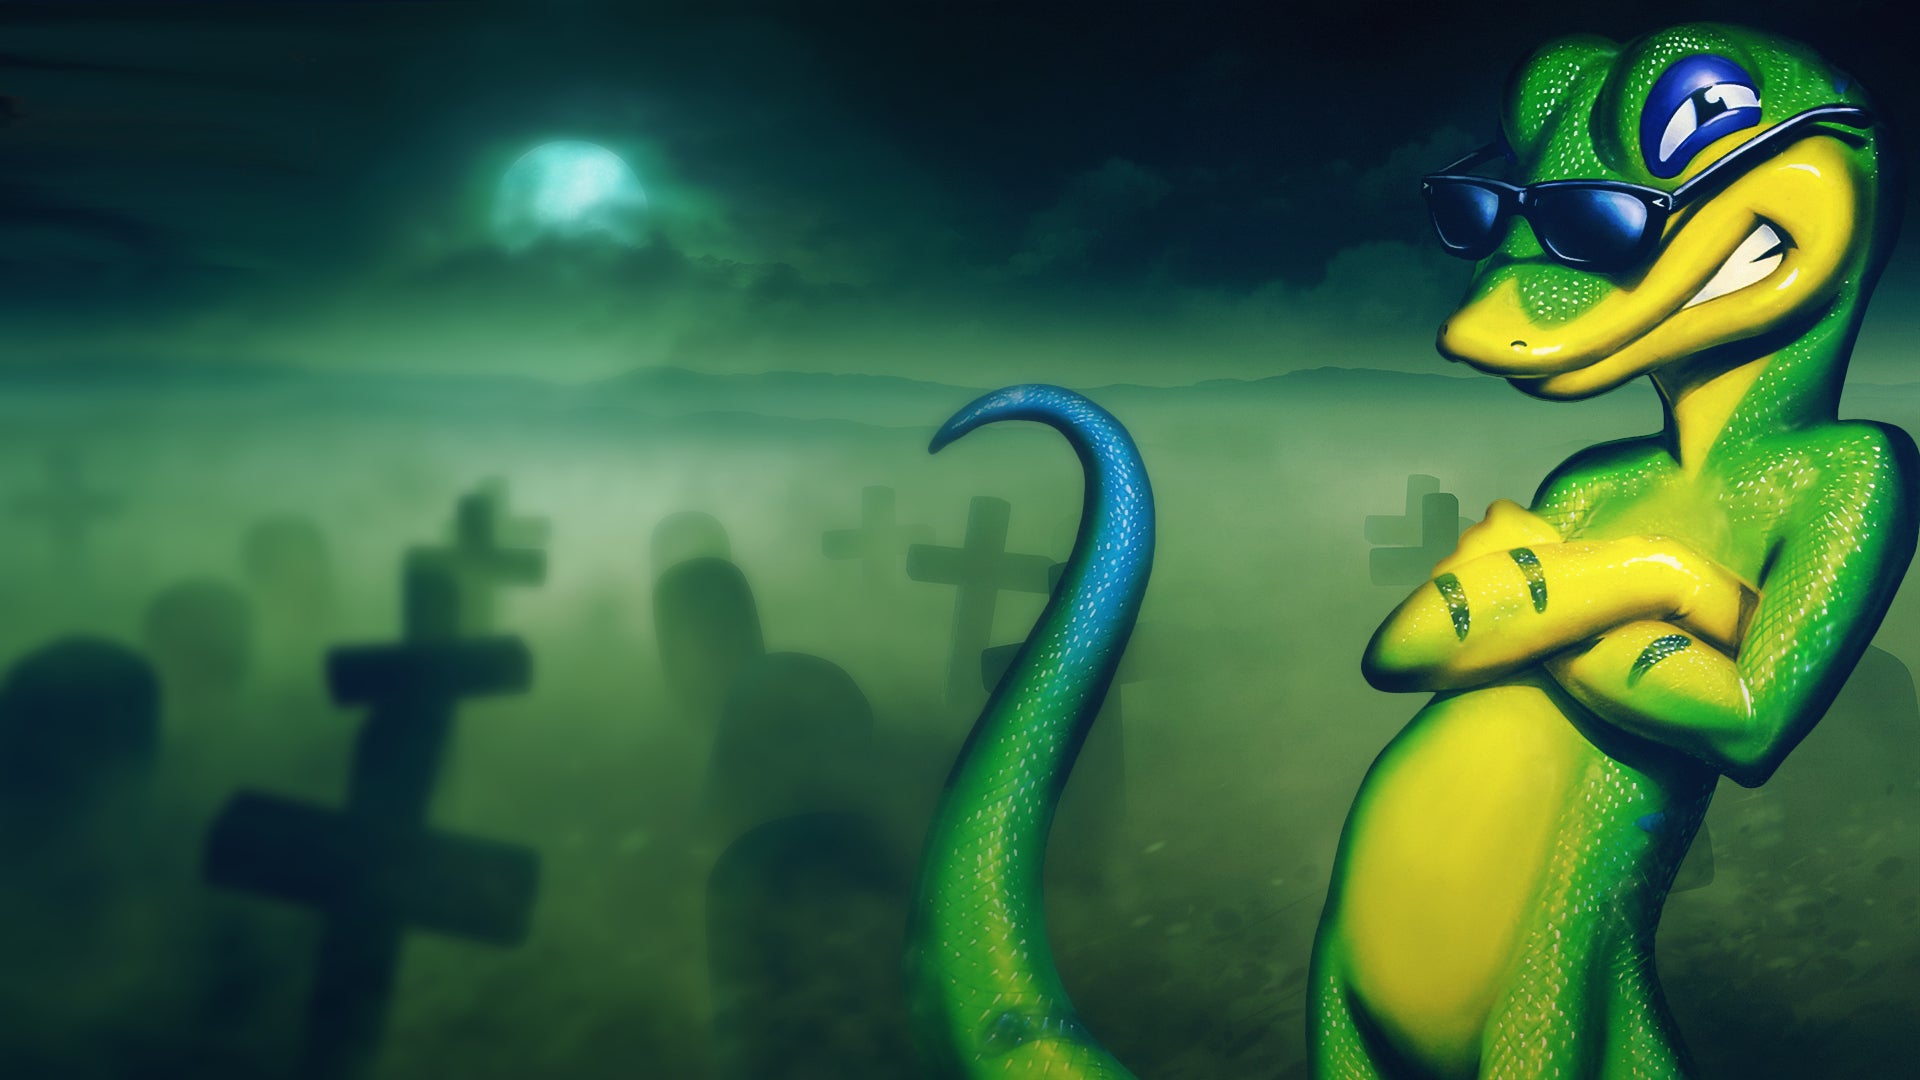 Image for Let’s talk about Gex, baby: Why Embracer should revive gaming’s worst mascot